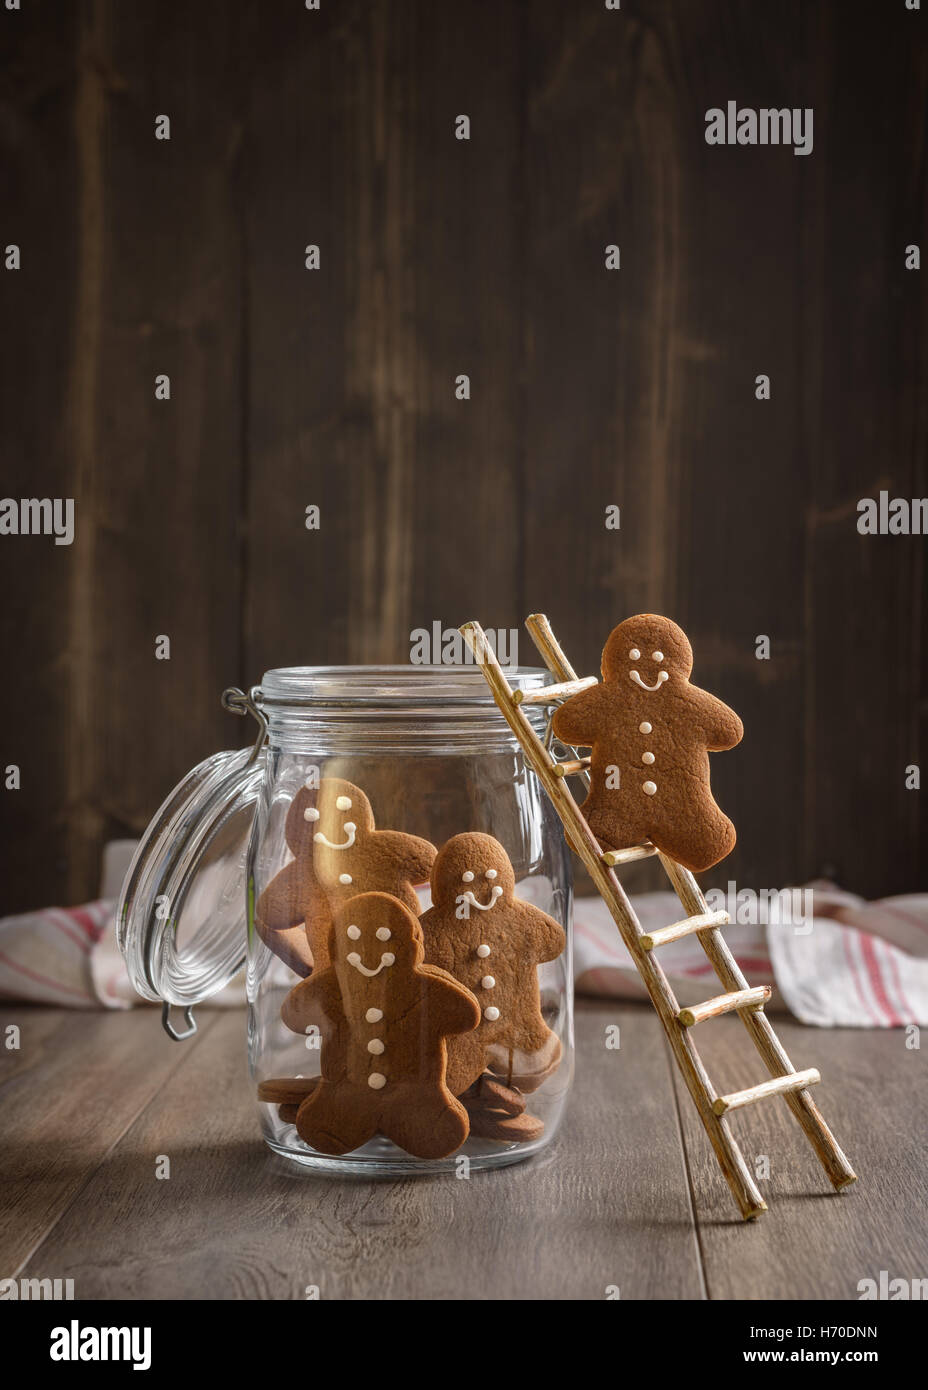 Gingerbread man on rustic ladder climbing into cookie jar Stock Photo